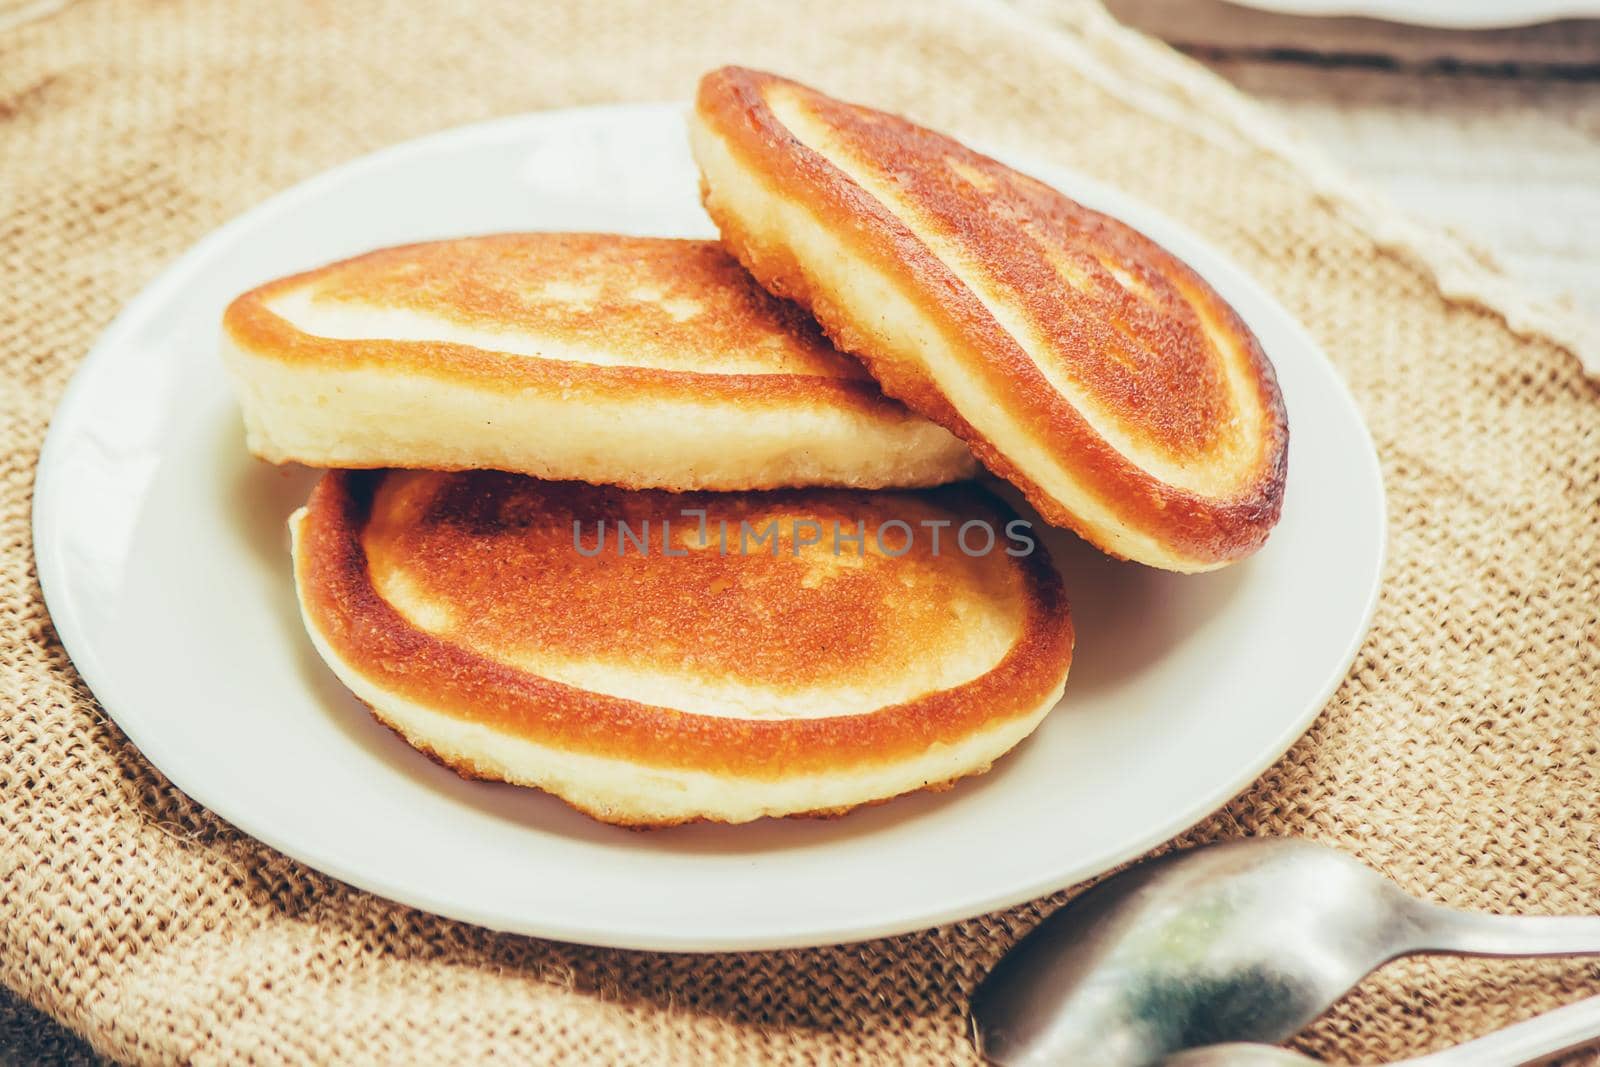 pancakes on a light background. selective focus. nature.